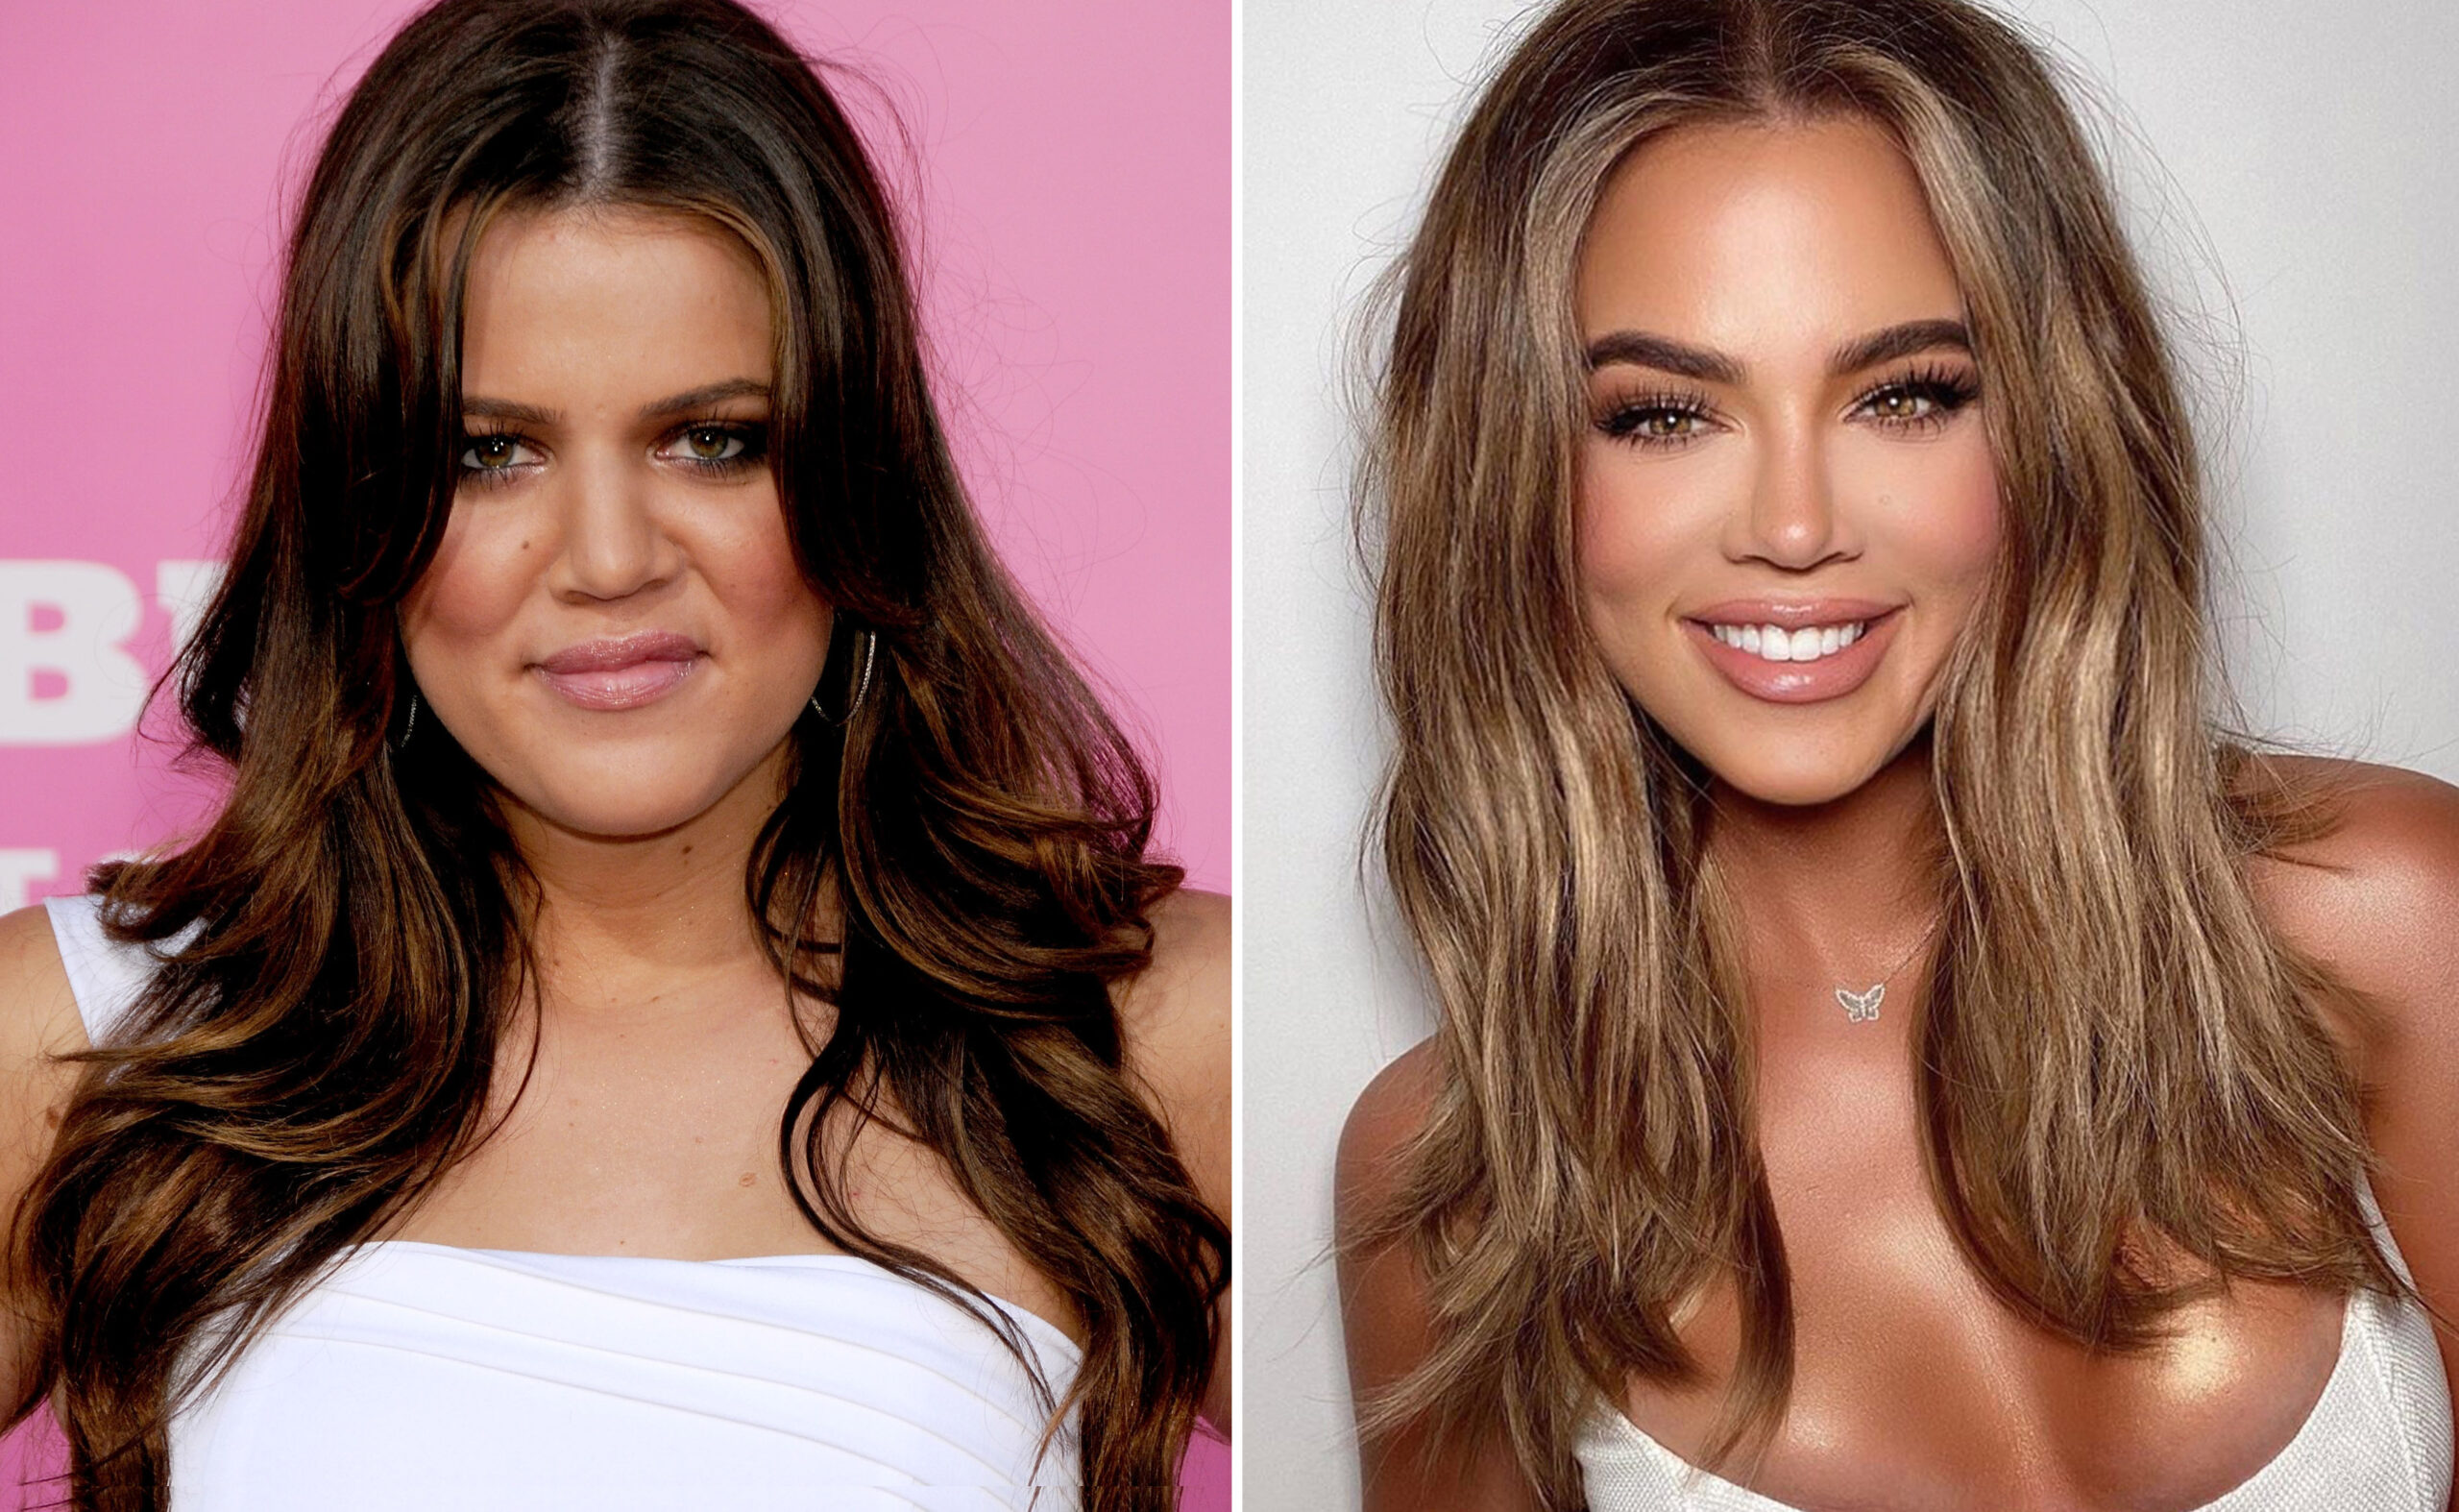 The truth behind Khloe Kardashian’s unreal beauty evolution, from being the “ugly” sister to breaking the internet